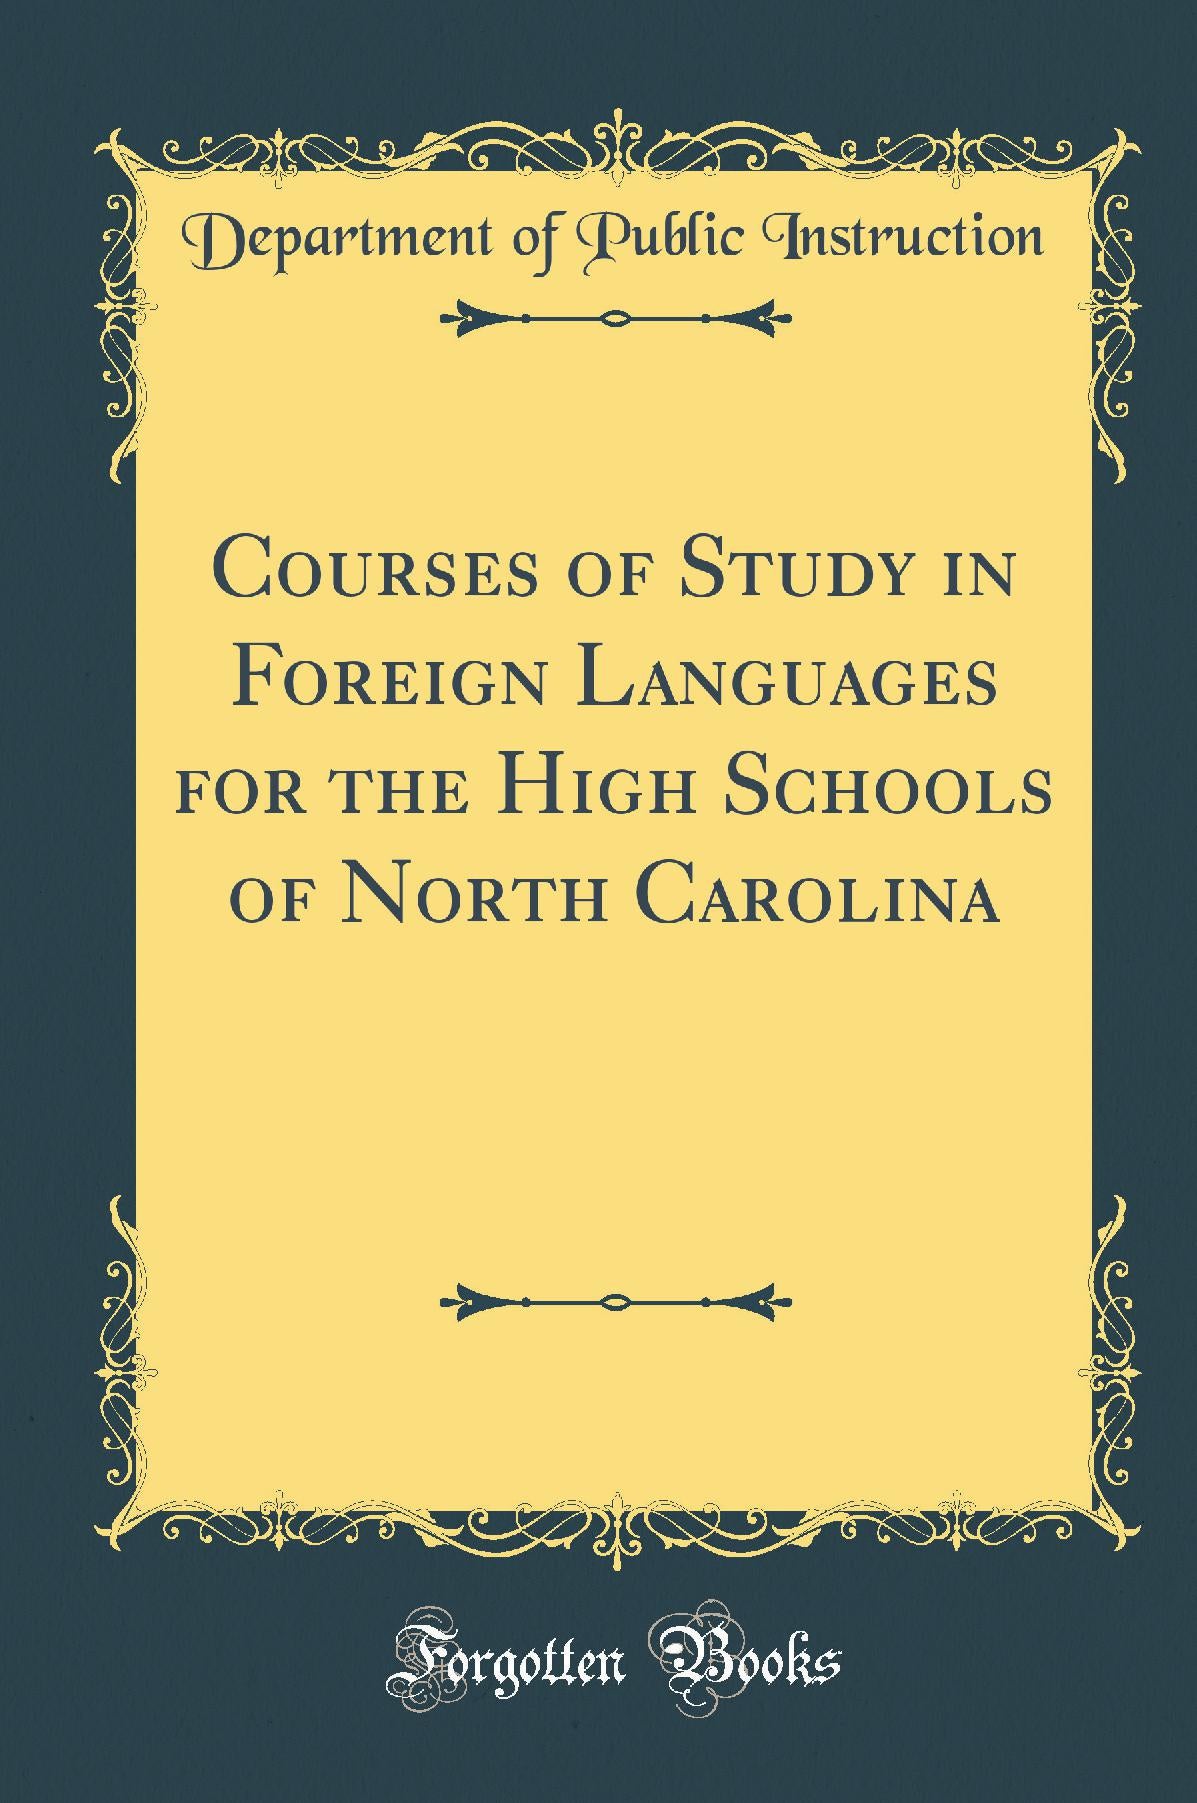 in　Study　Ca　Courses　High　of　of　for　Foreign　Schools　North　Languages　the